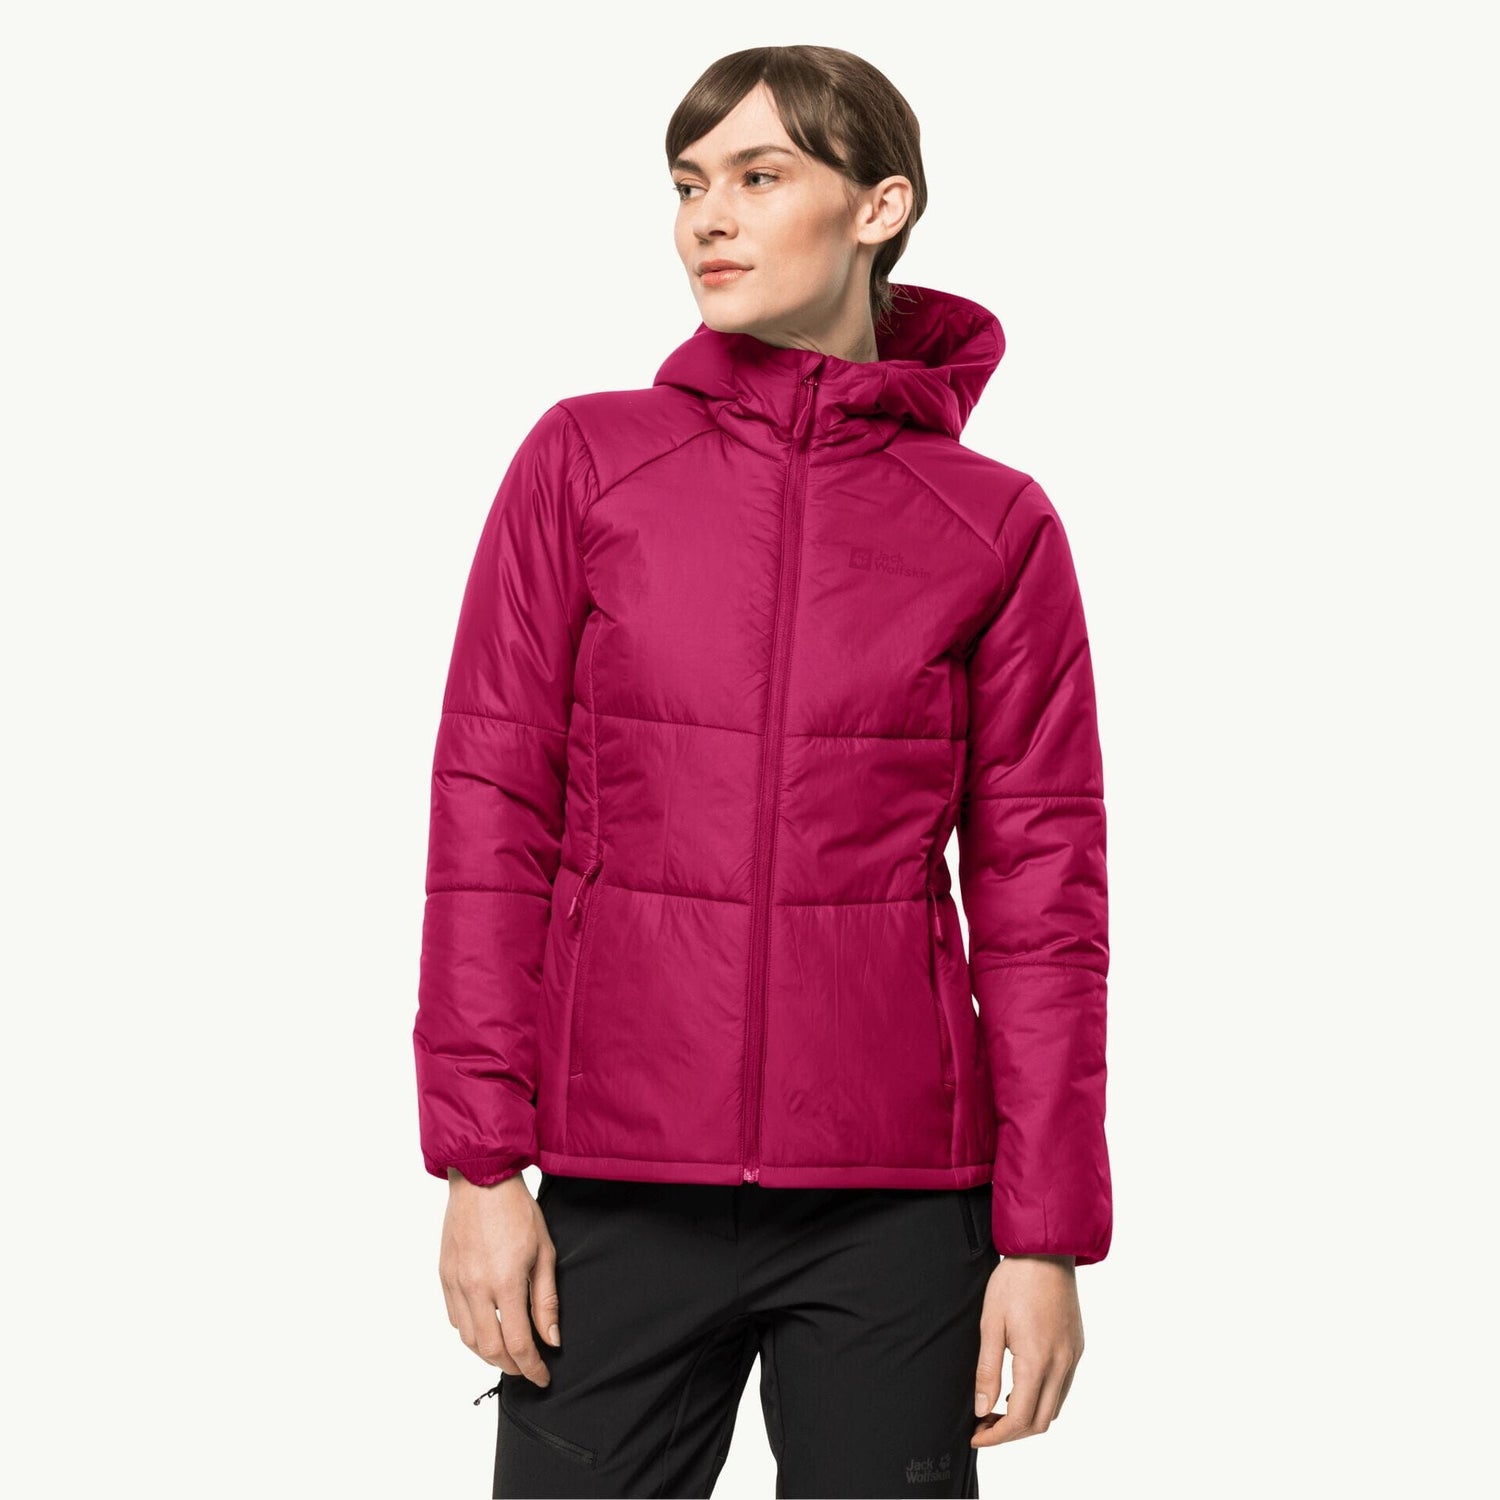 - Ins Weekendbee Jack jacket insulated sportswear - materials sustainable – Bergland Wolfskin W\'s Recycled Hoody